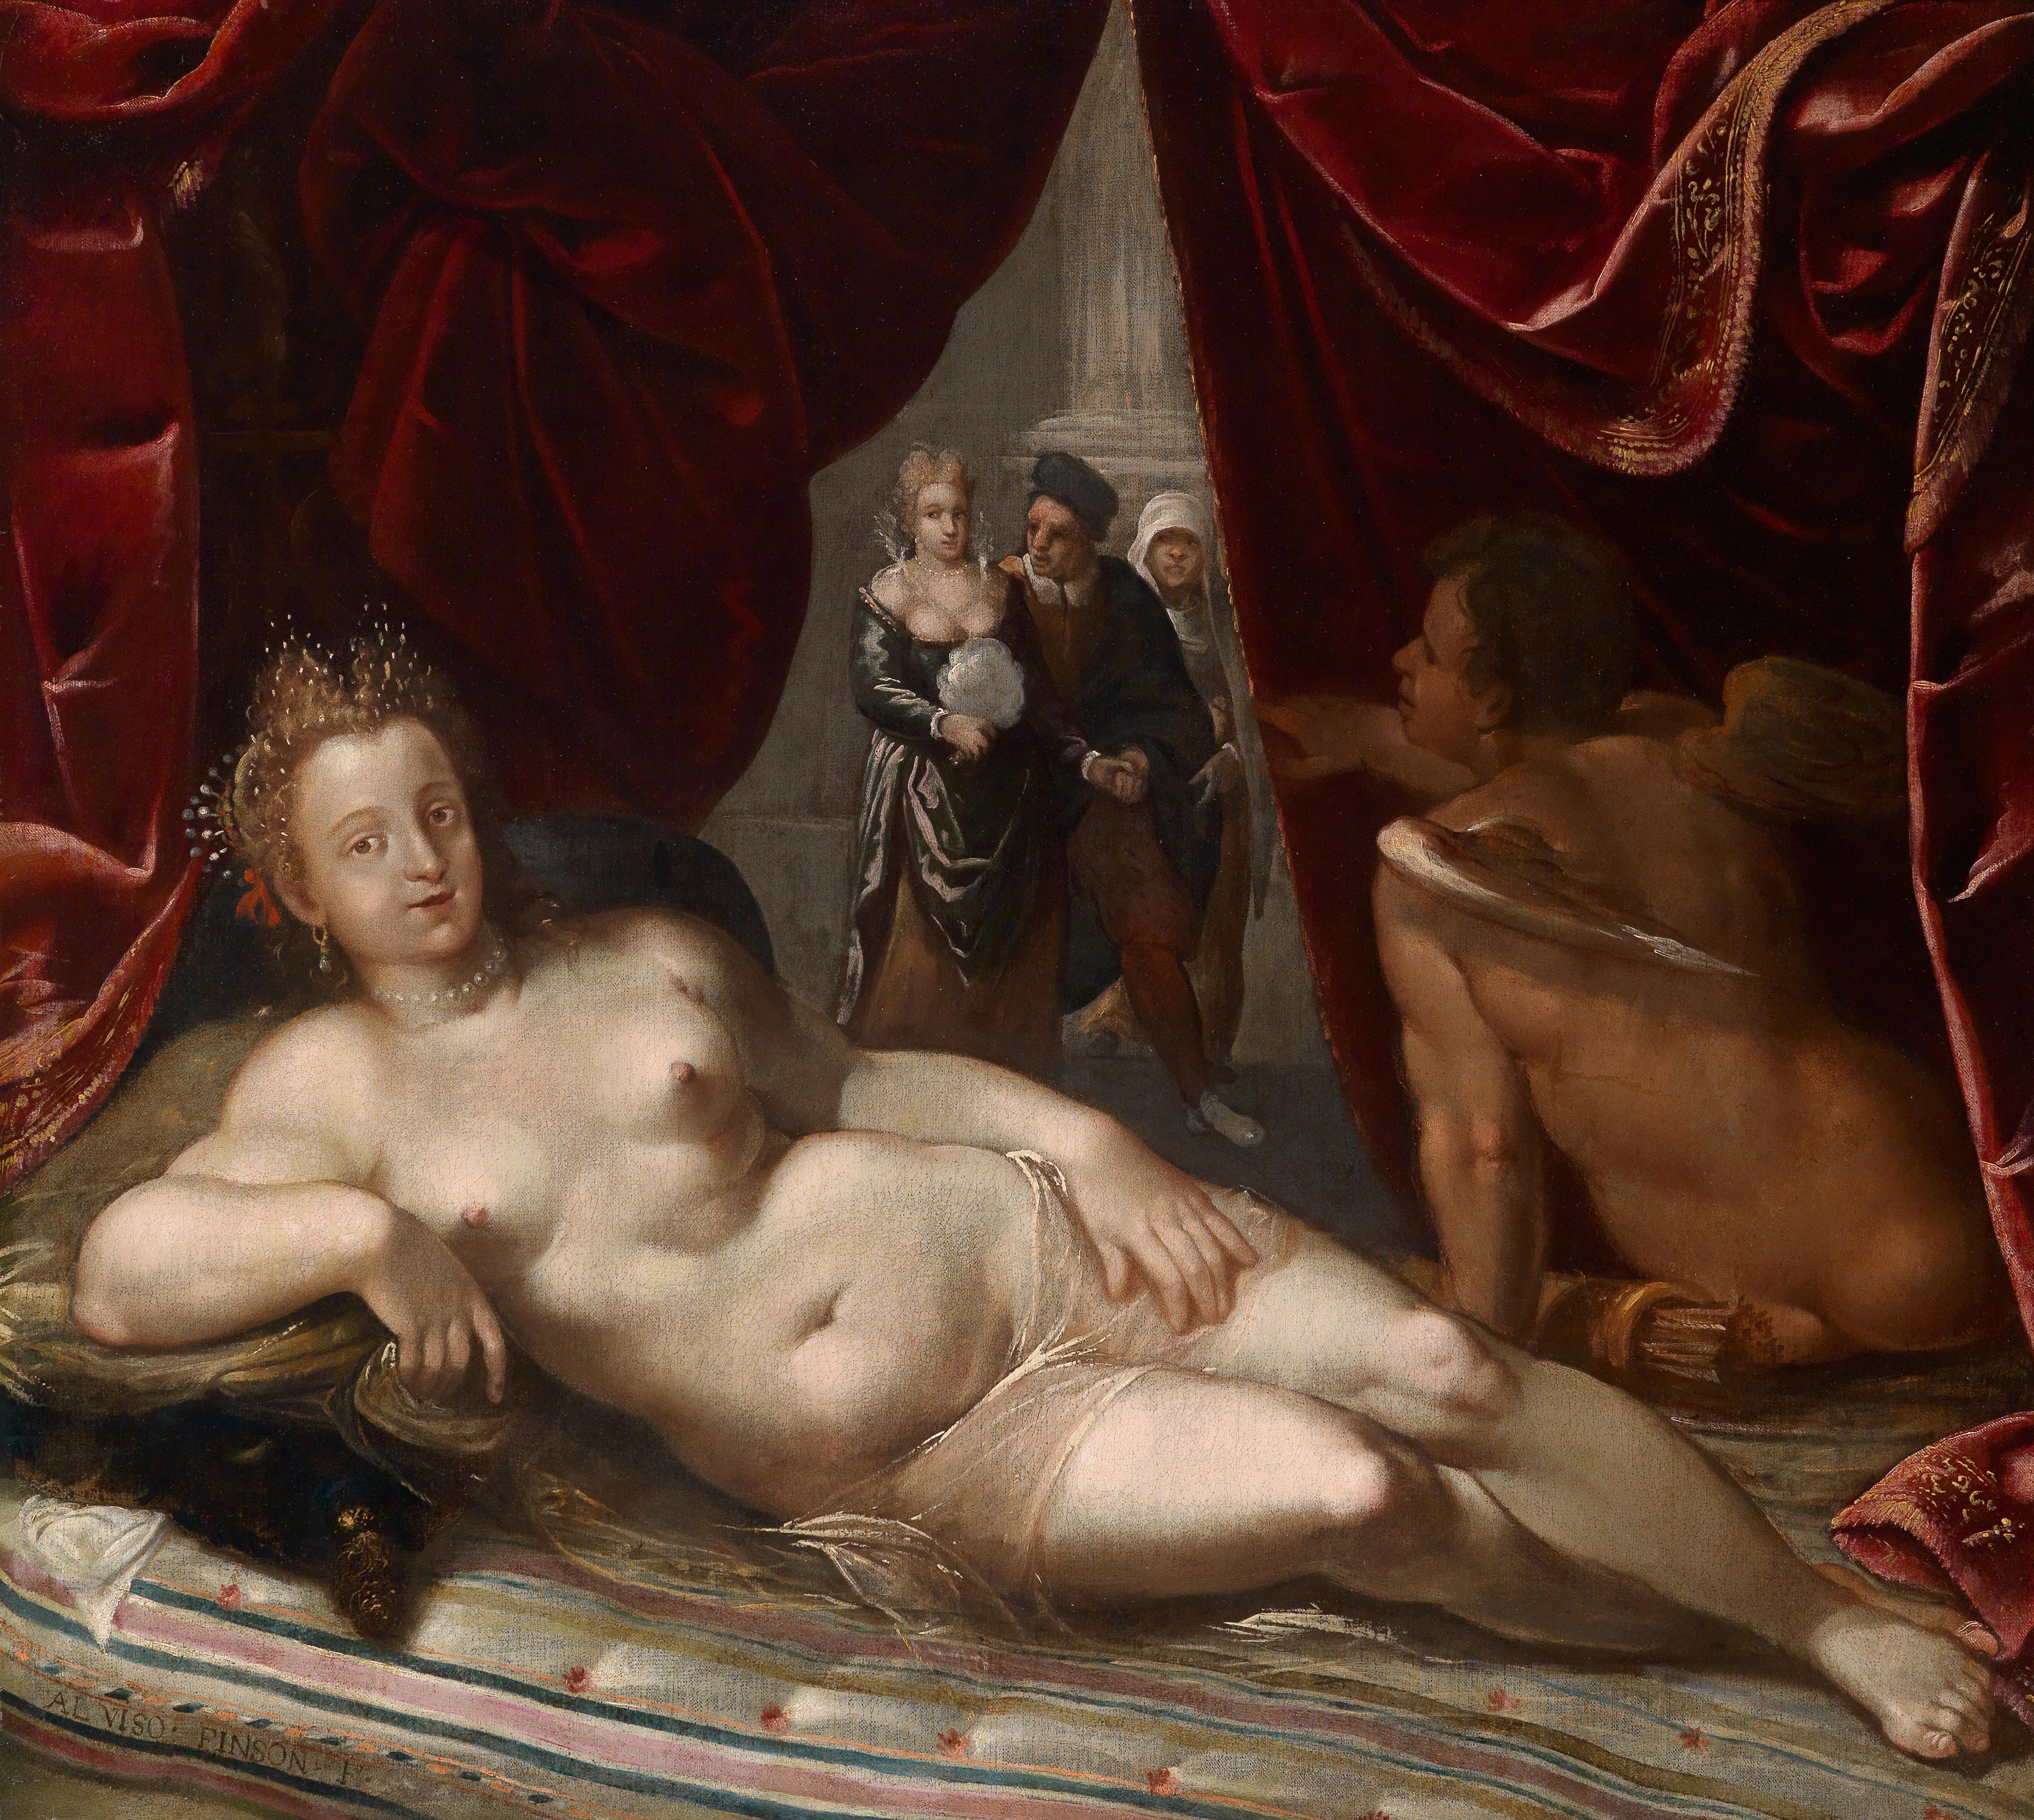 Venus With Cupid And Lovers In The Background by Louis Finson